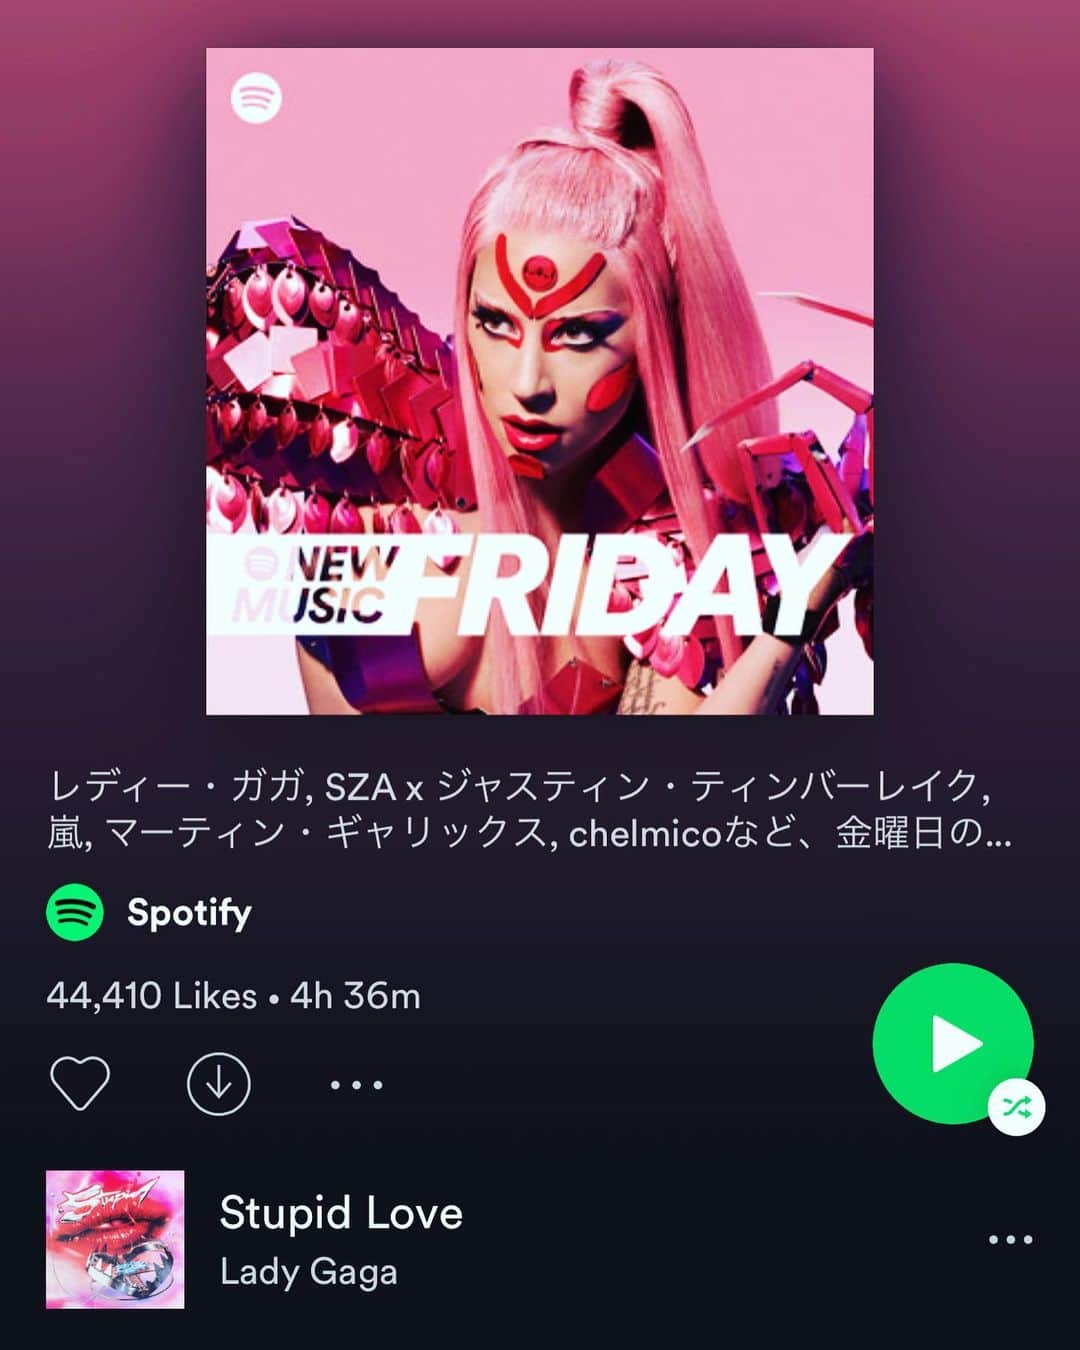 Rie fuさんのインスタグラム写真 - (Rie fuInstagram)「Thank u @spotifyjp @tunecorejapan for the playlists🎧❣️🌈素敵なプレイリスト入りに感謝🙌🏻　#20songs20weeks #riefu #classics #realize #music #streaming #newmusicfriday #driveloud #womensvoices」3月2日 15時29分 - riefuofficial